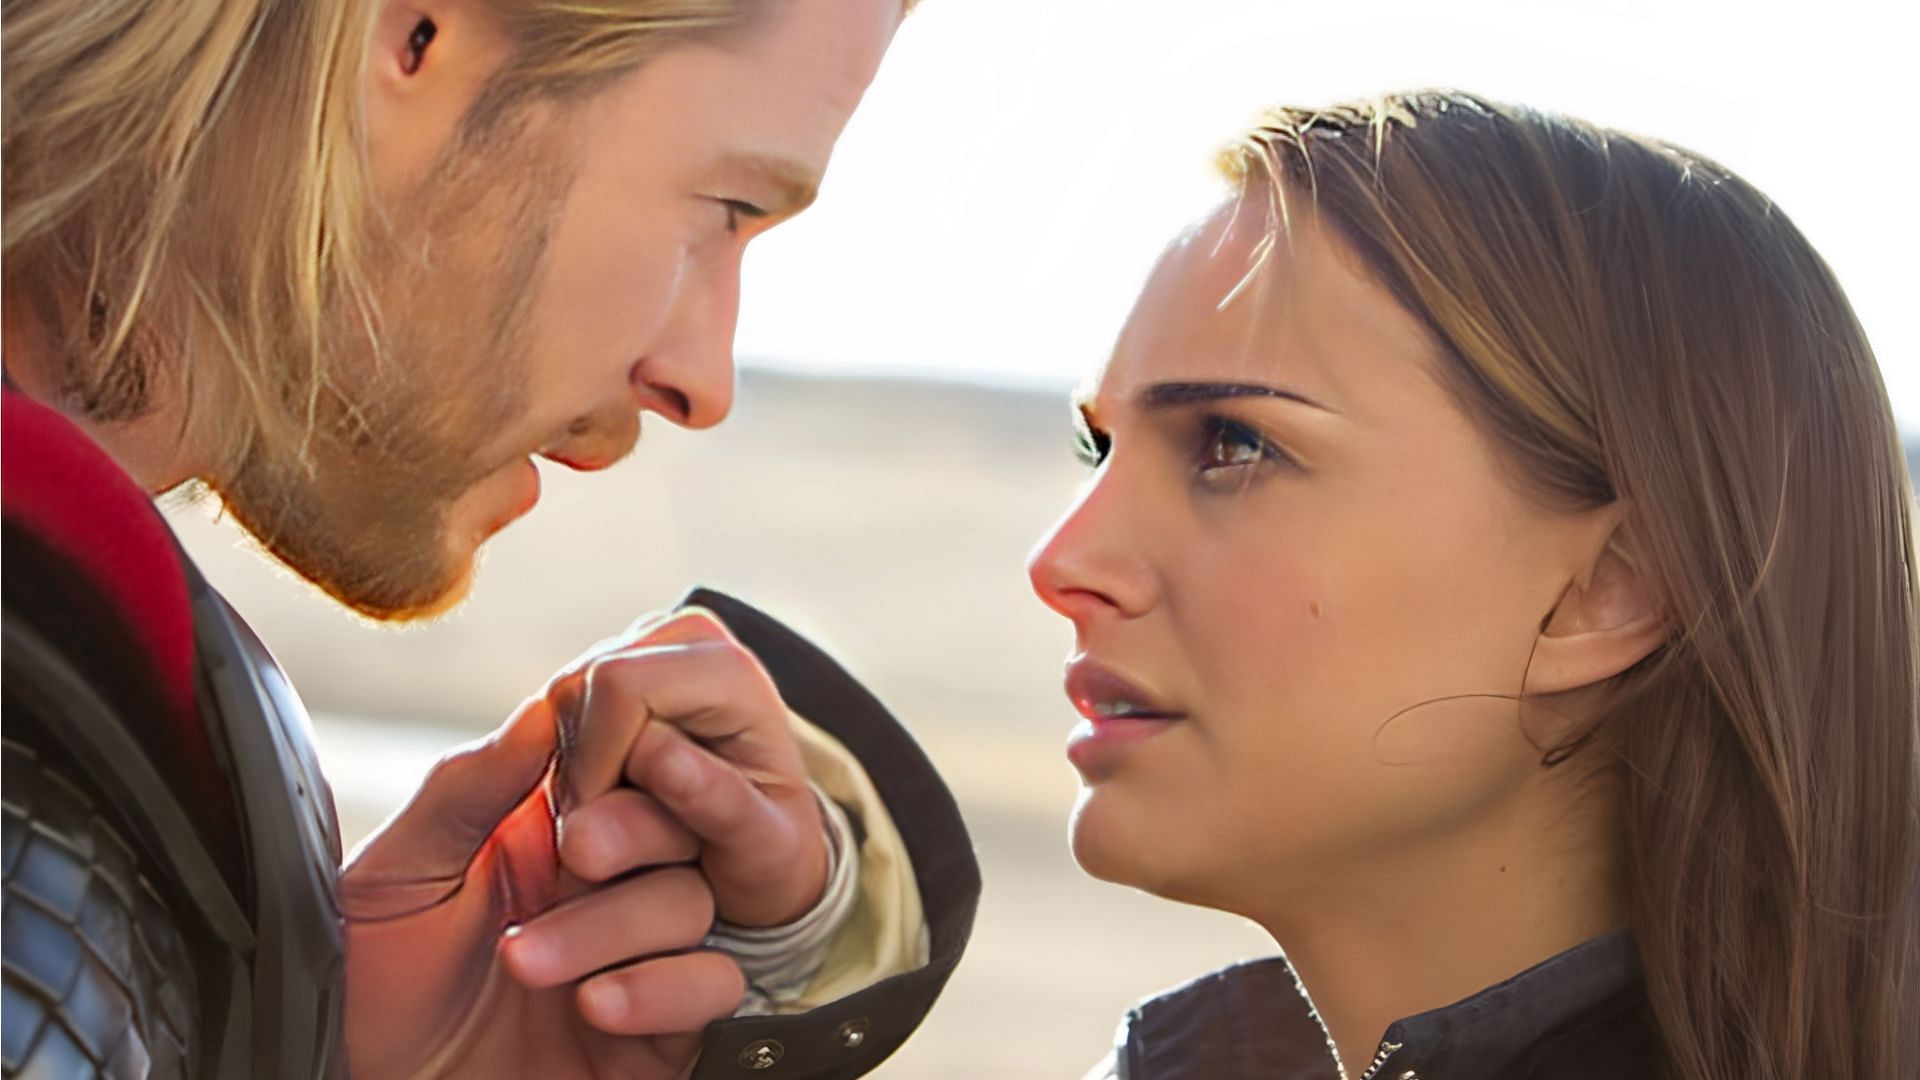 Thor and Jane displayed an undeniable bond, one that was driven by mutual trust and compassion. (Image via Marvel)